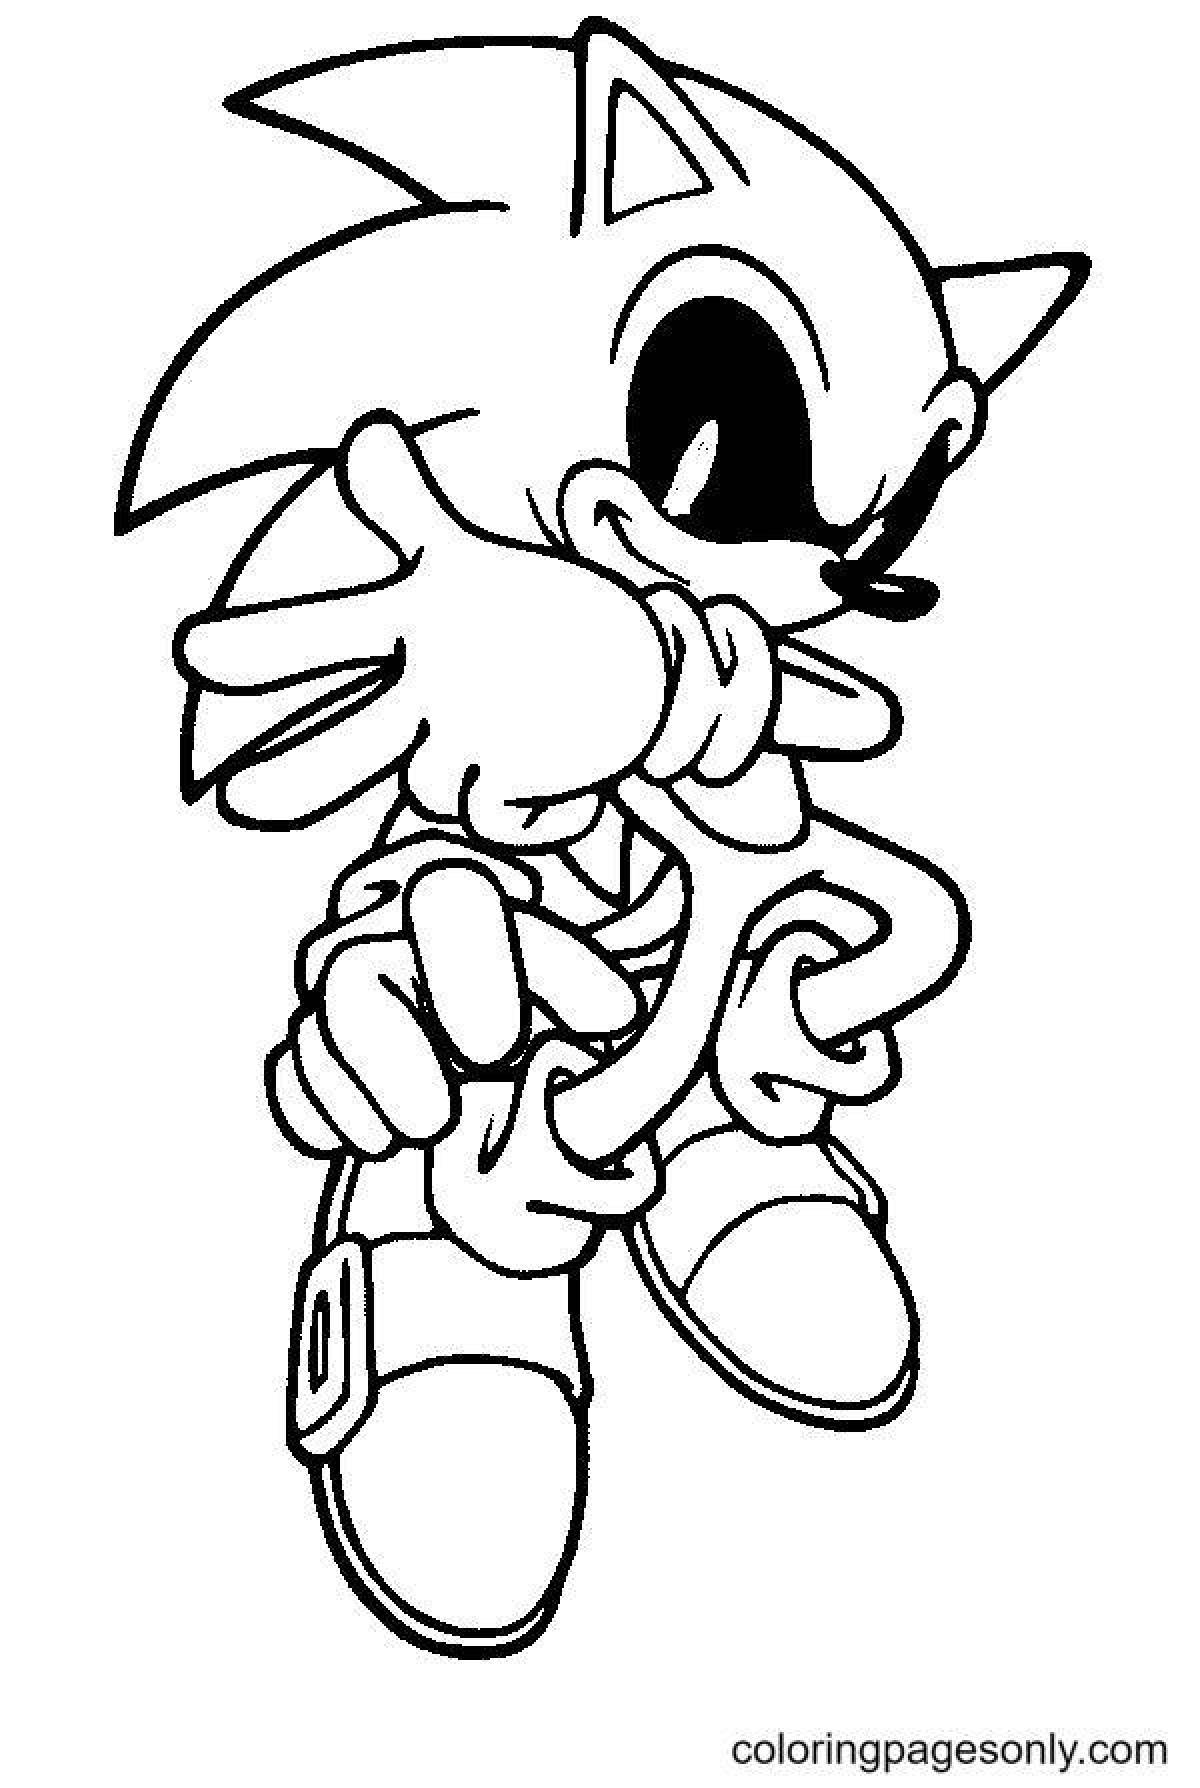 Outstanding sonic.exe coloring